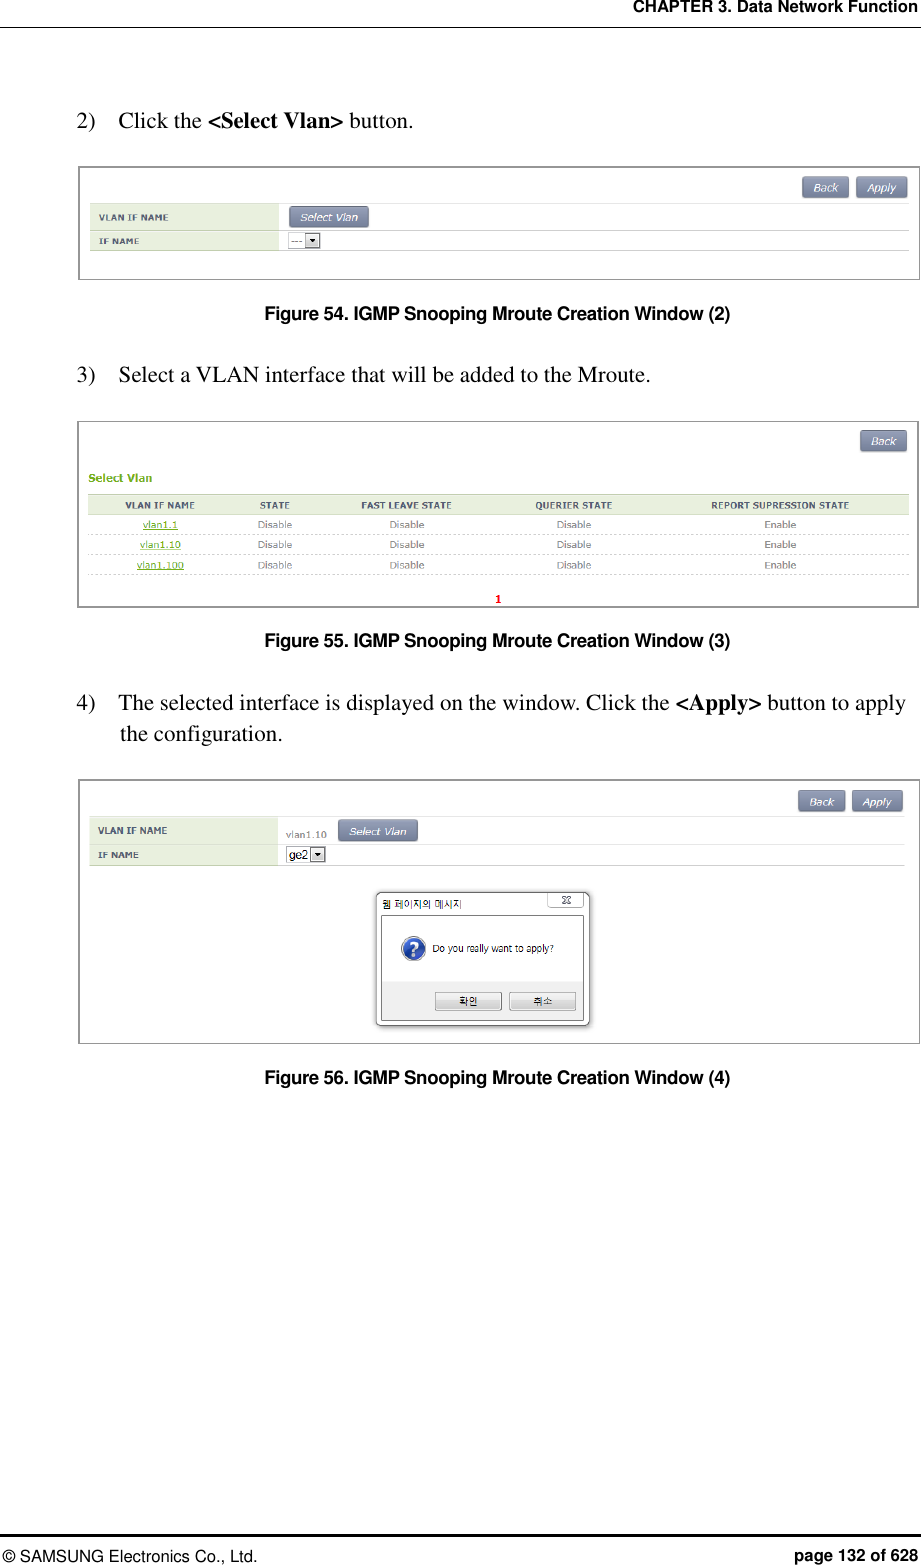 CHAPTER 3. Data Network Function ©  SAMSUNG Electronics Co., Ltd.  page 132 of 628 2)    Click the &lt;Select Vlan&gt; button.  Figure 54. IGMP Snooping Mroute Creation Window (2)  3)    Select a VLAN interface that will be added to the Mroute.  Figure 55. IGMP Snooping Mroute Creation Window (3)  4)    The selected interface is displayed on the window. Click the &lt;Apply&gt; button to apply the configuration.  Figure 56. IGMP Snooping Mroute Creation Window (4) 